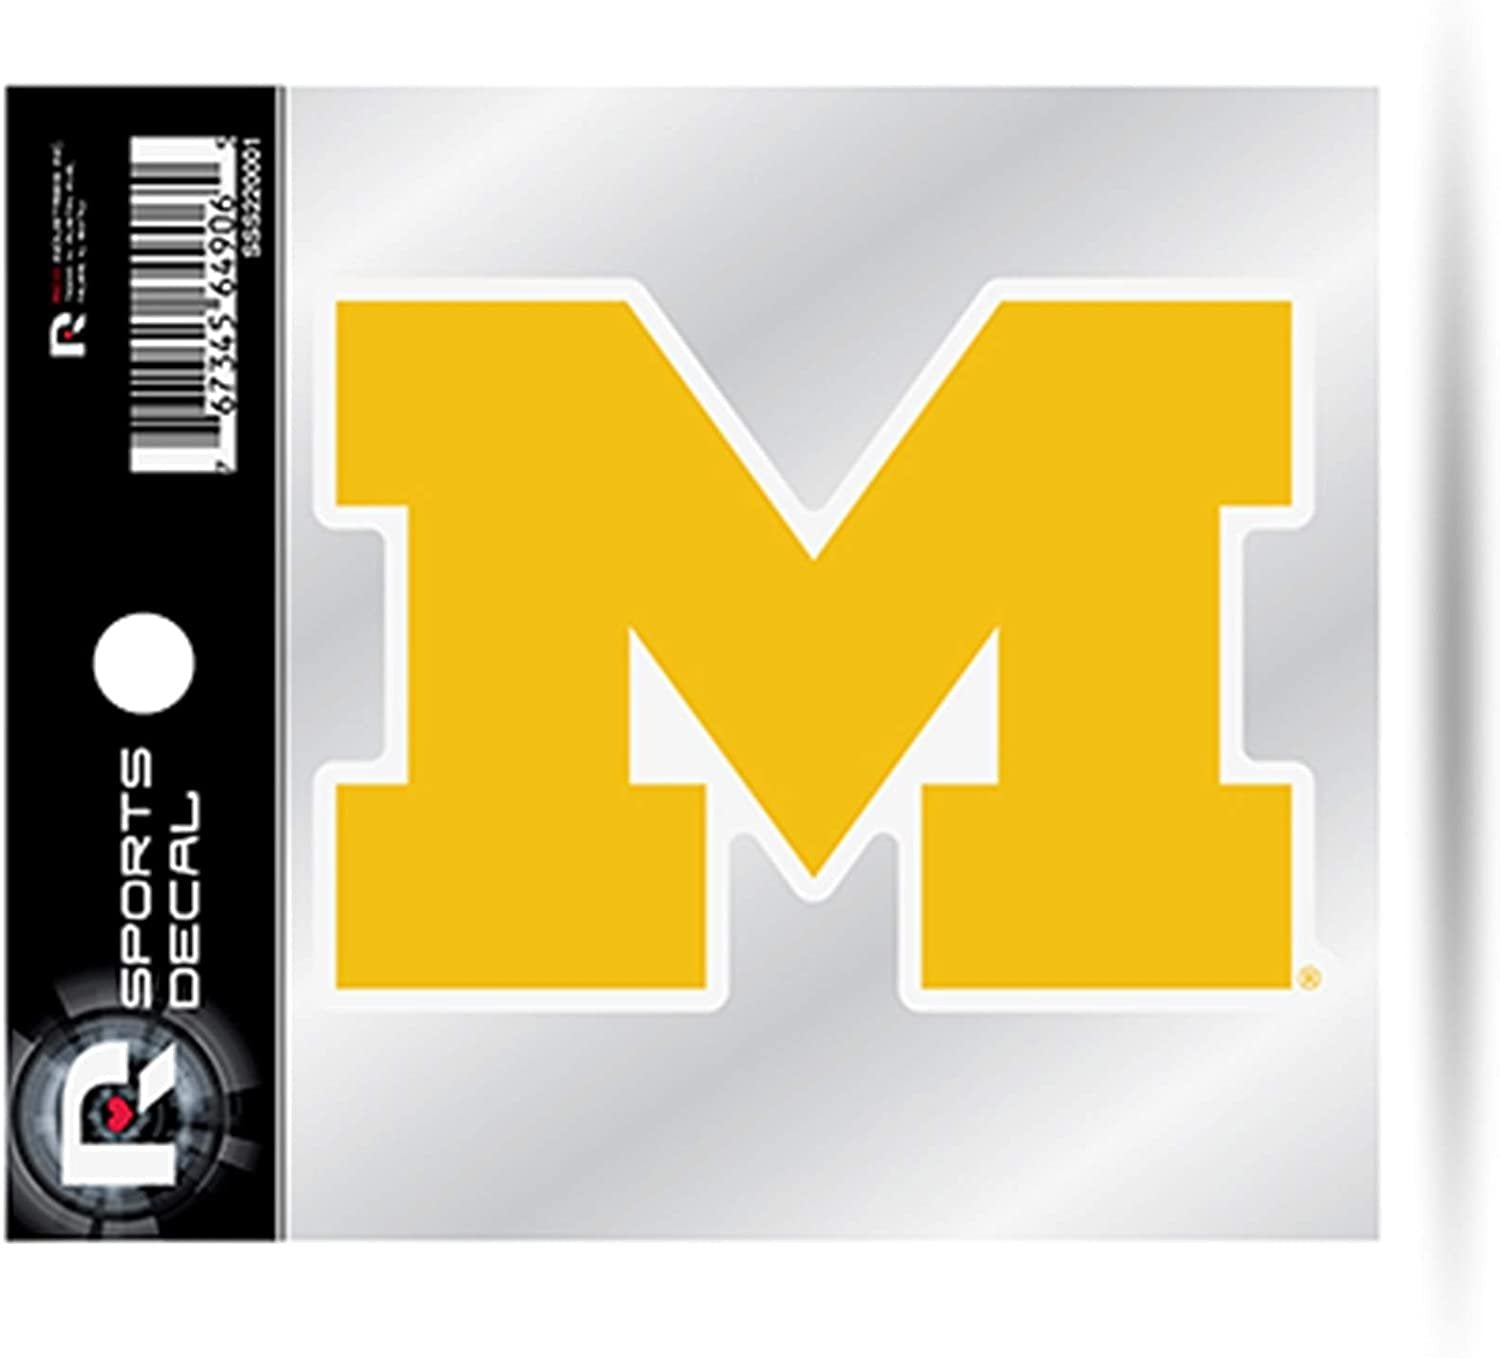 Michigan Wolverines Premium 4x4 Decal with Clear Backing Flat Vinyl Auto Home Sticker University of